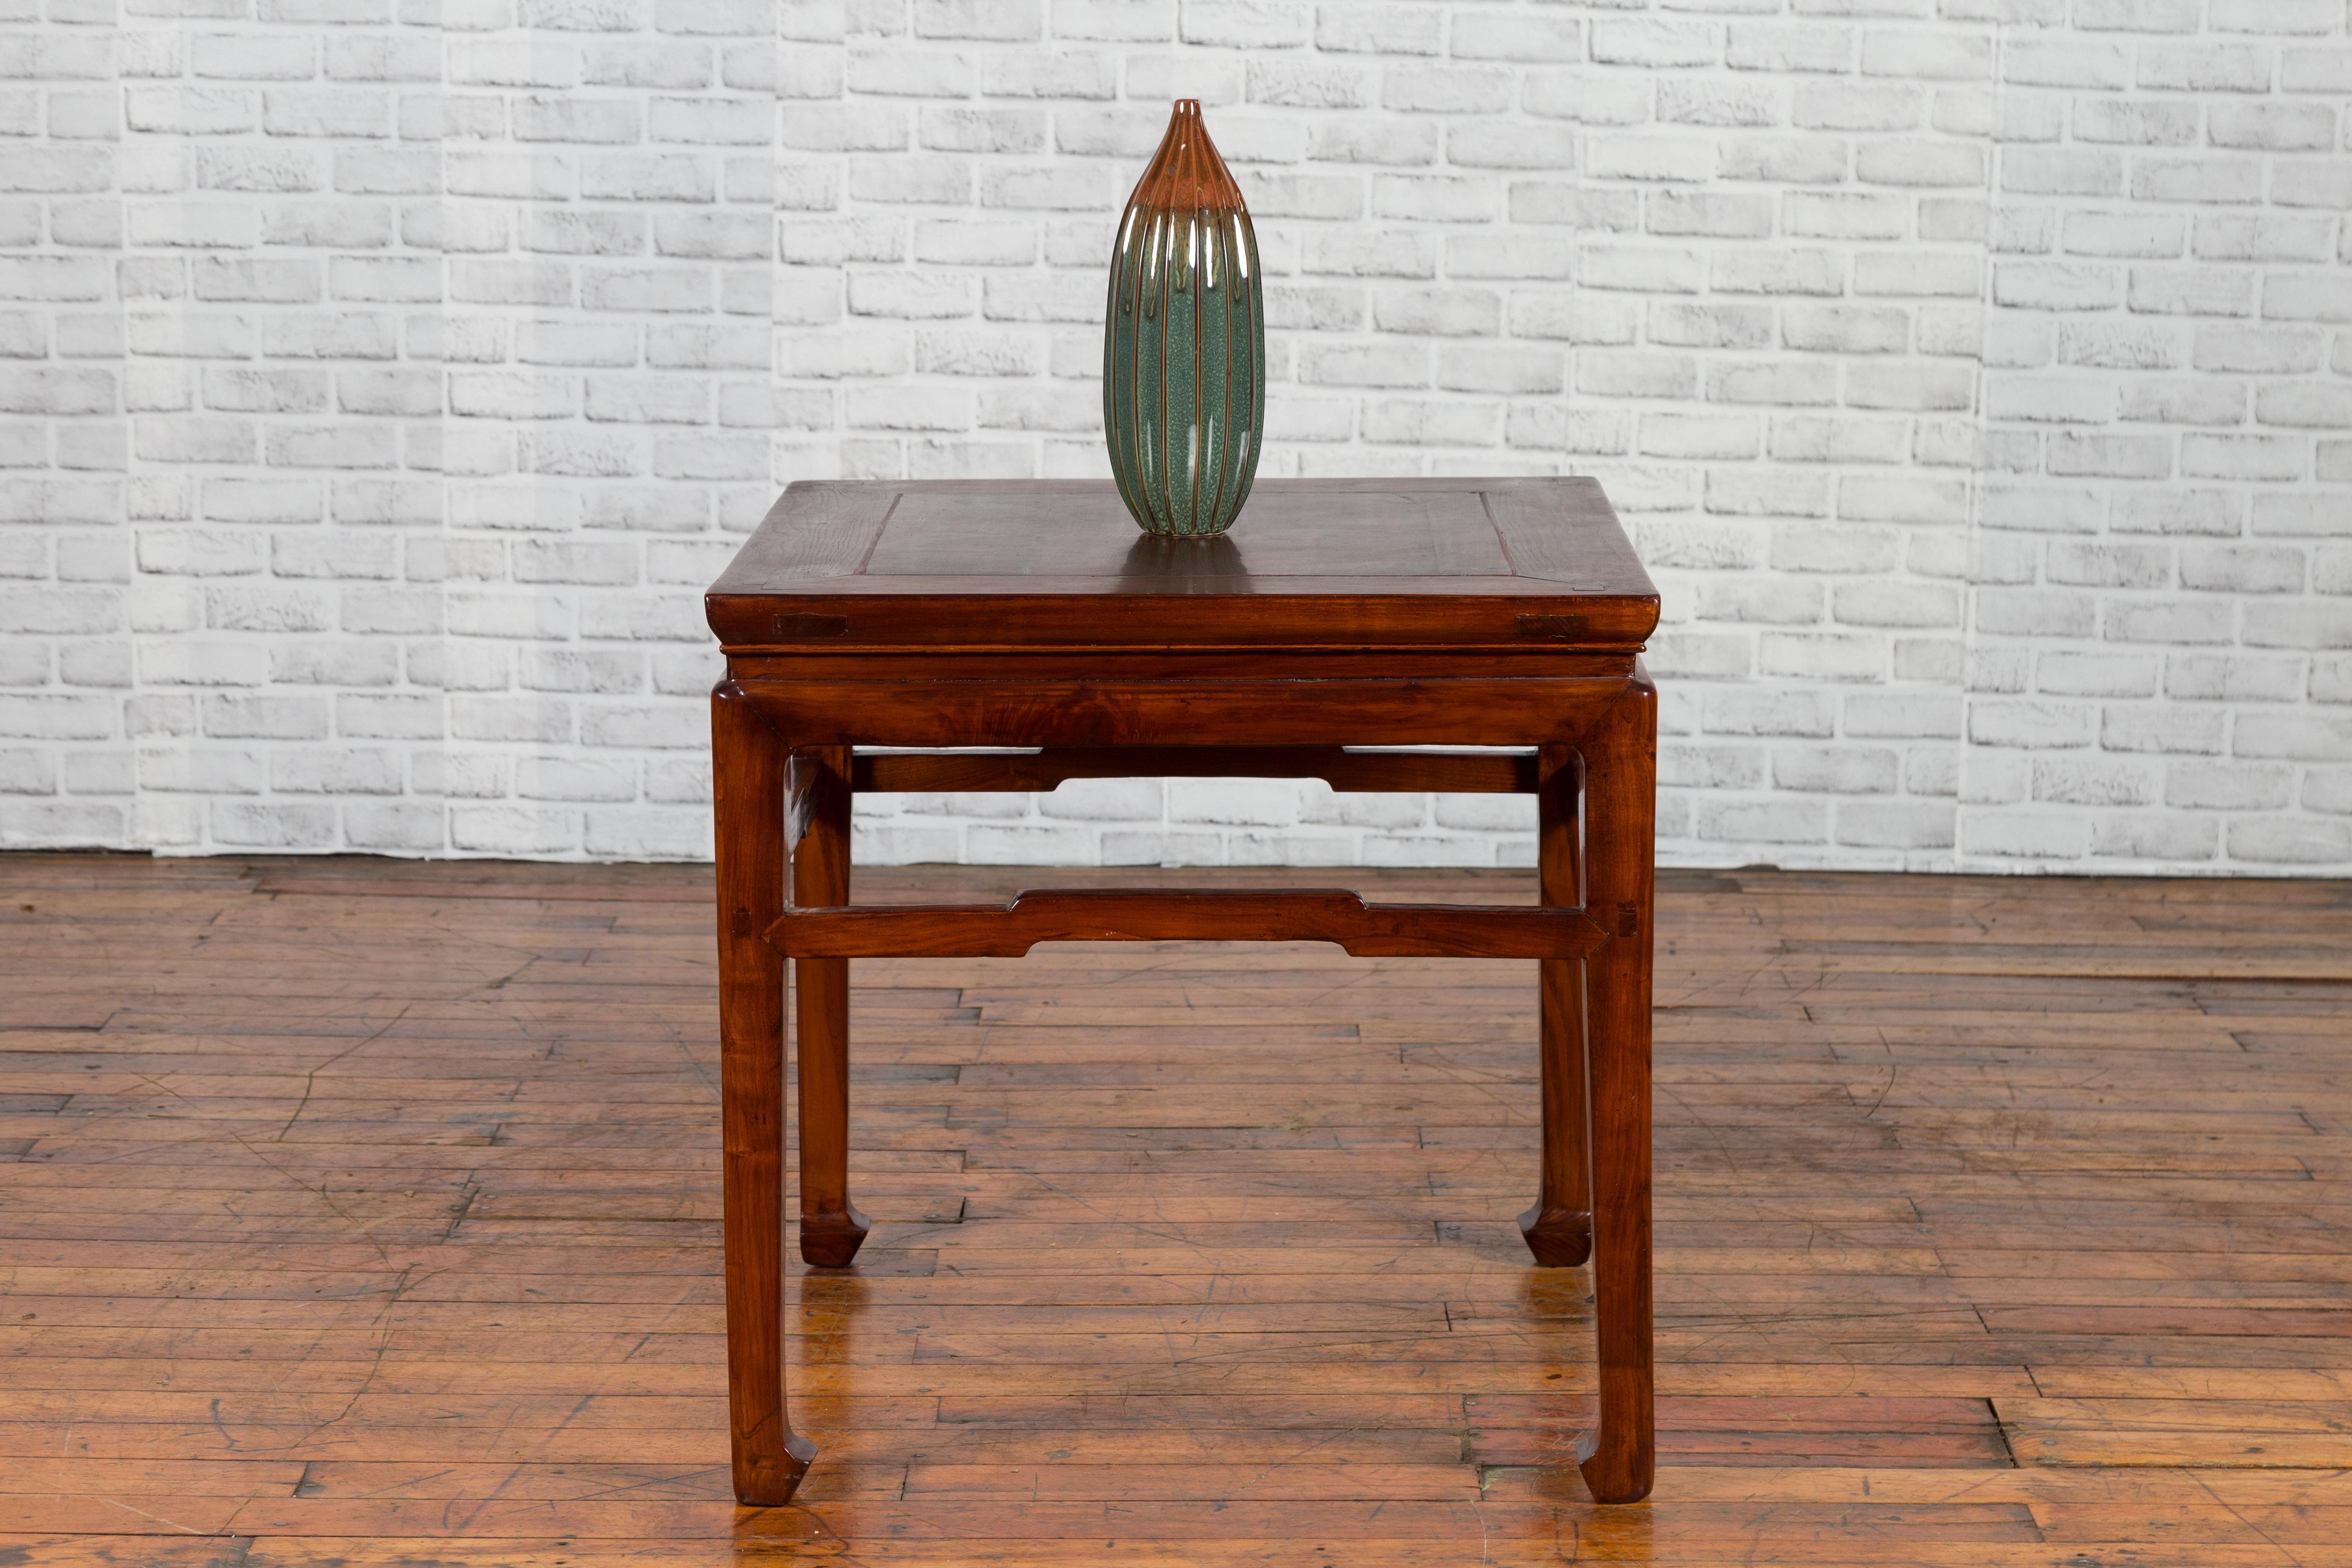 A Chinese Ming Dynasty style side table from the early 20th century, with humpbacked stretcher, horsehoof feet and waisted apron. Created in China during the early years of the 20th century, this side table, originally used as a stool, features a